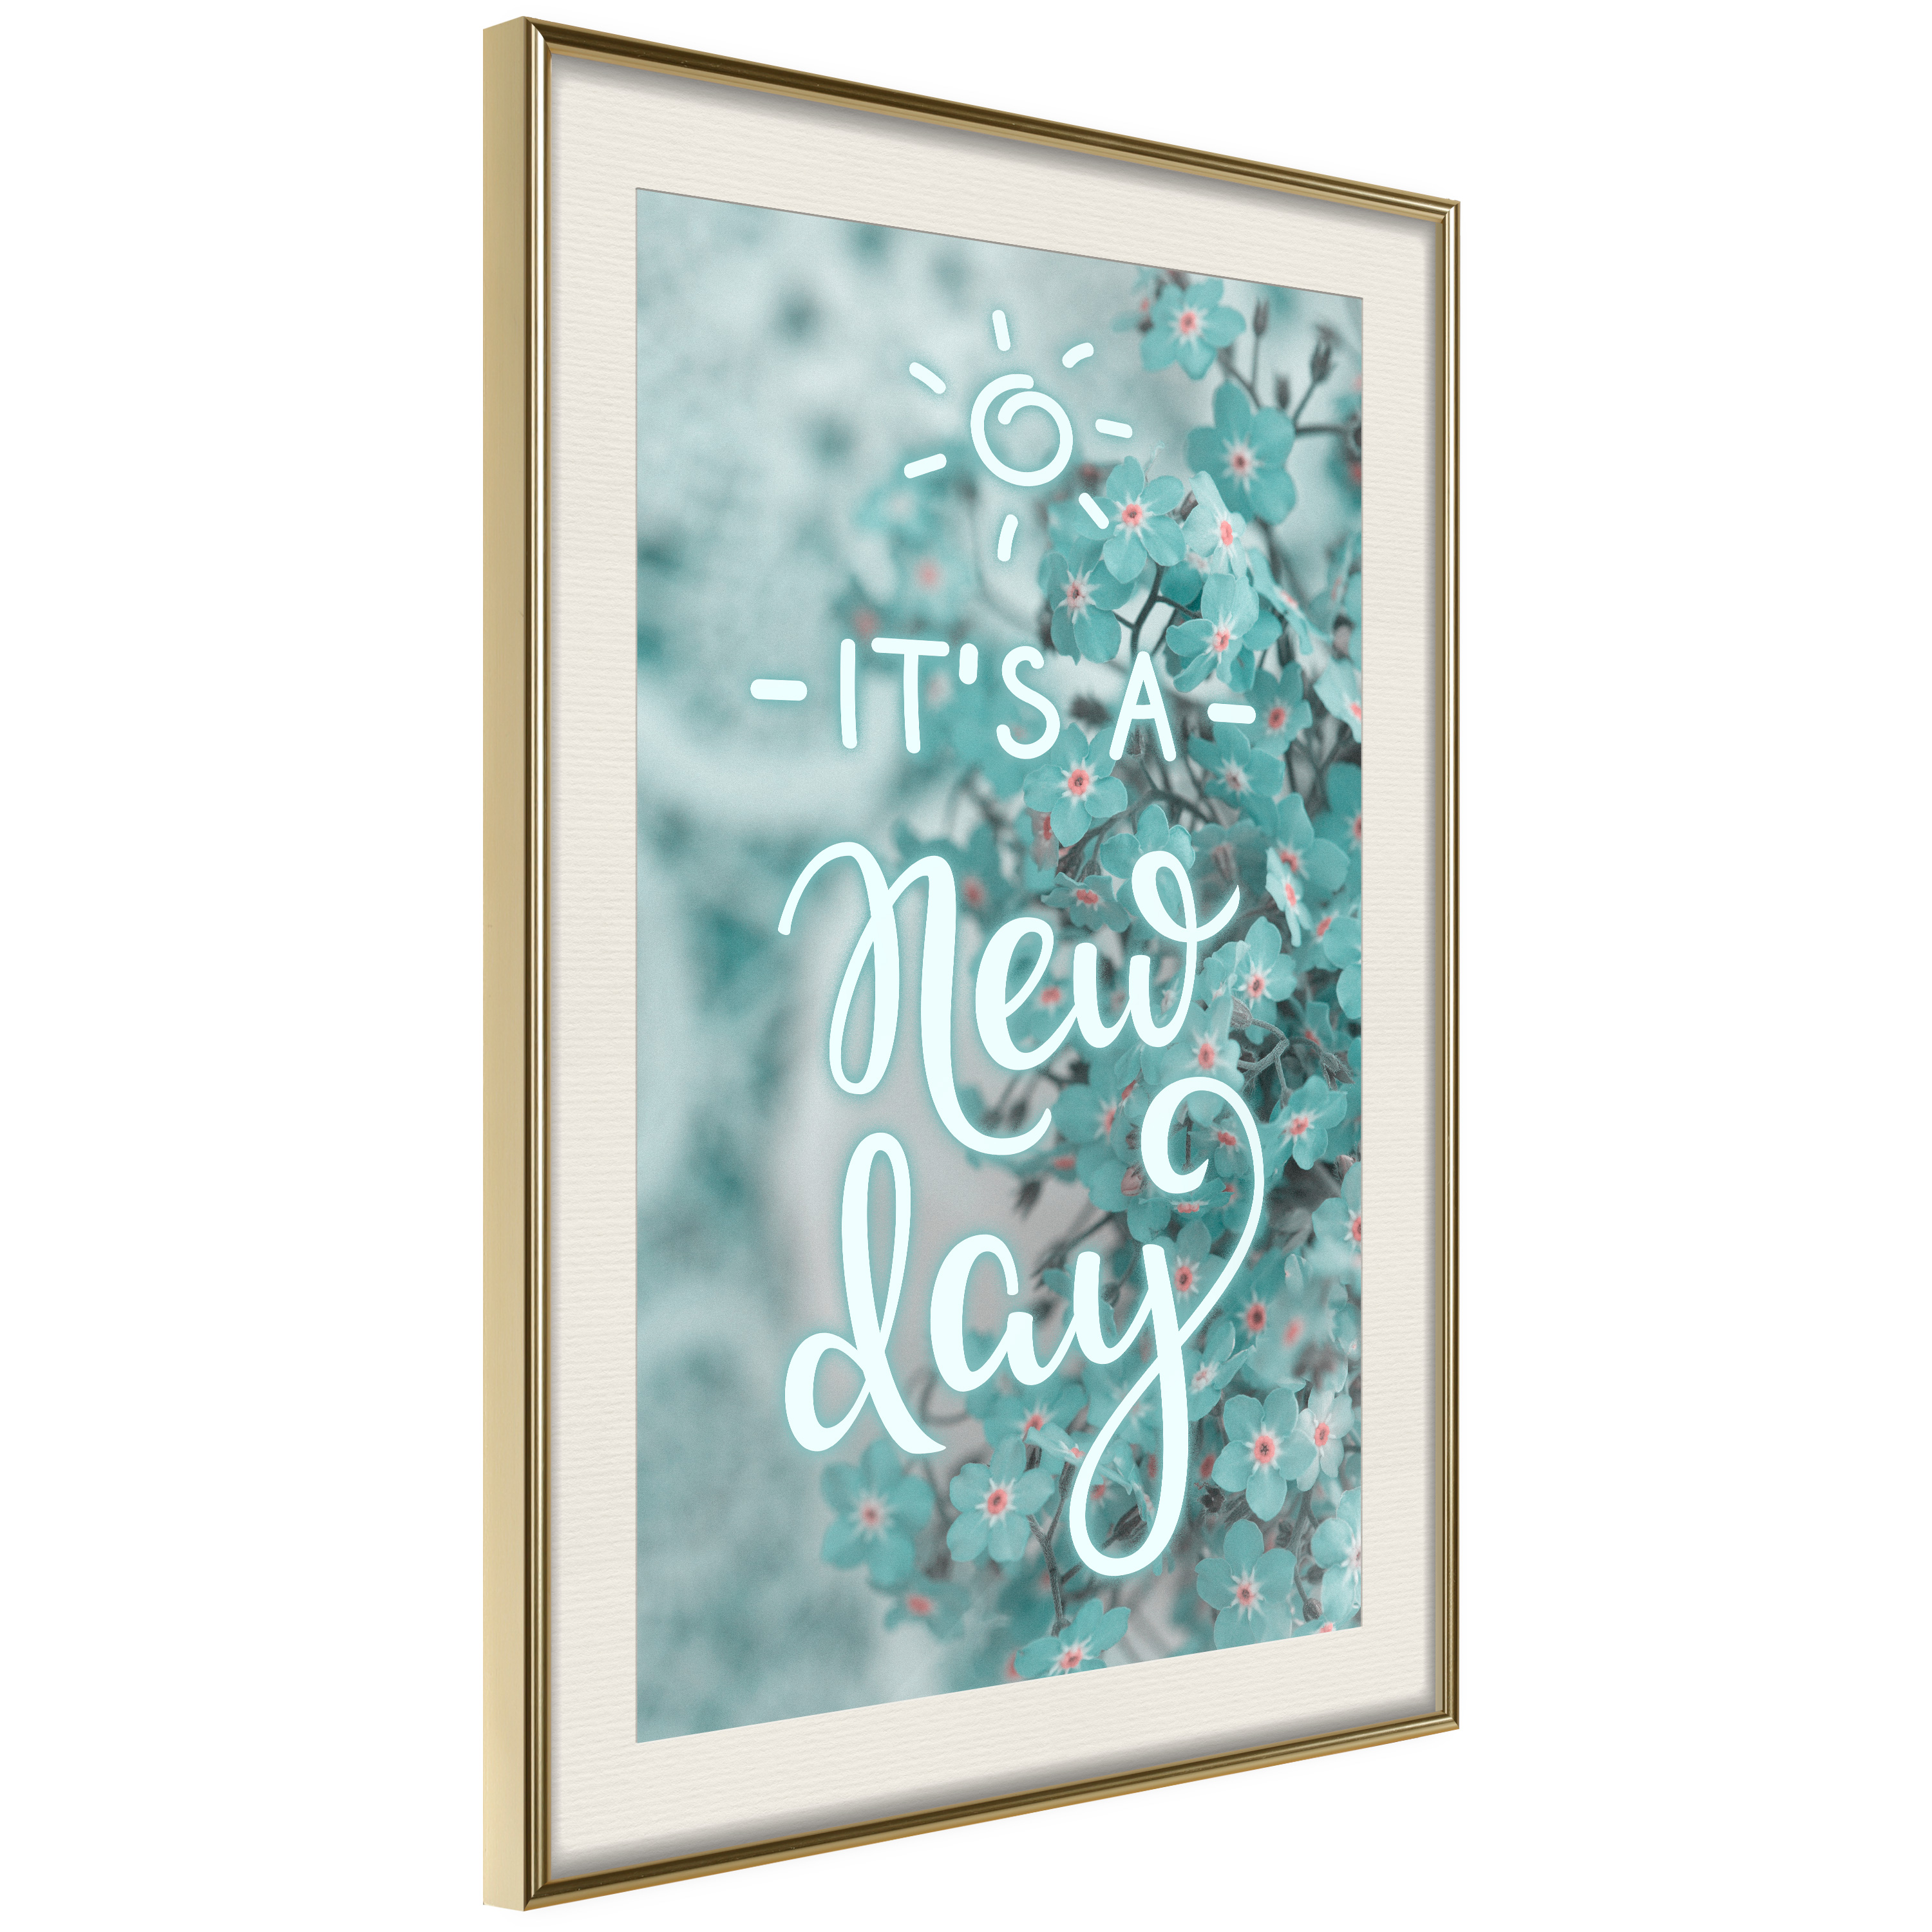 Poster - New Day - 20x30